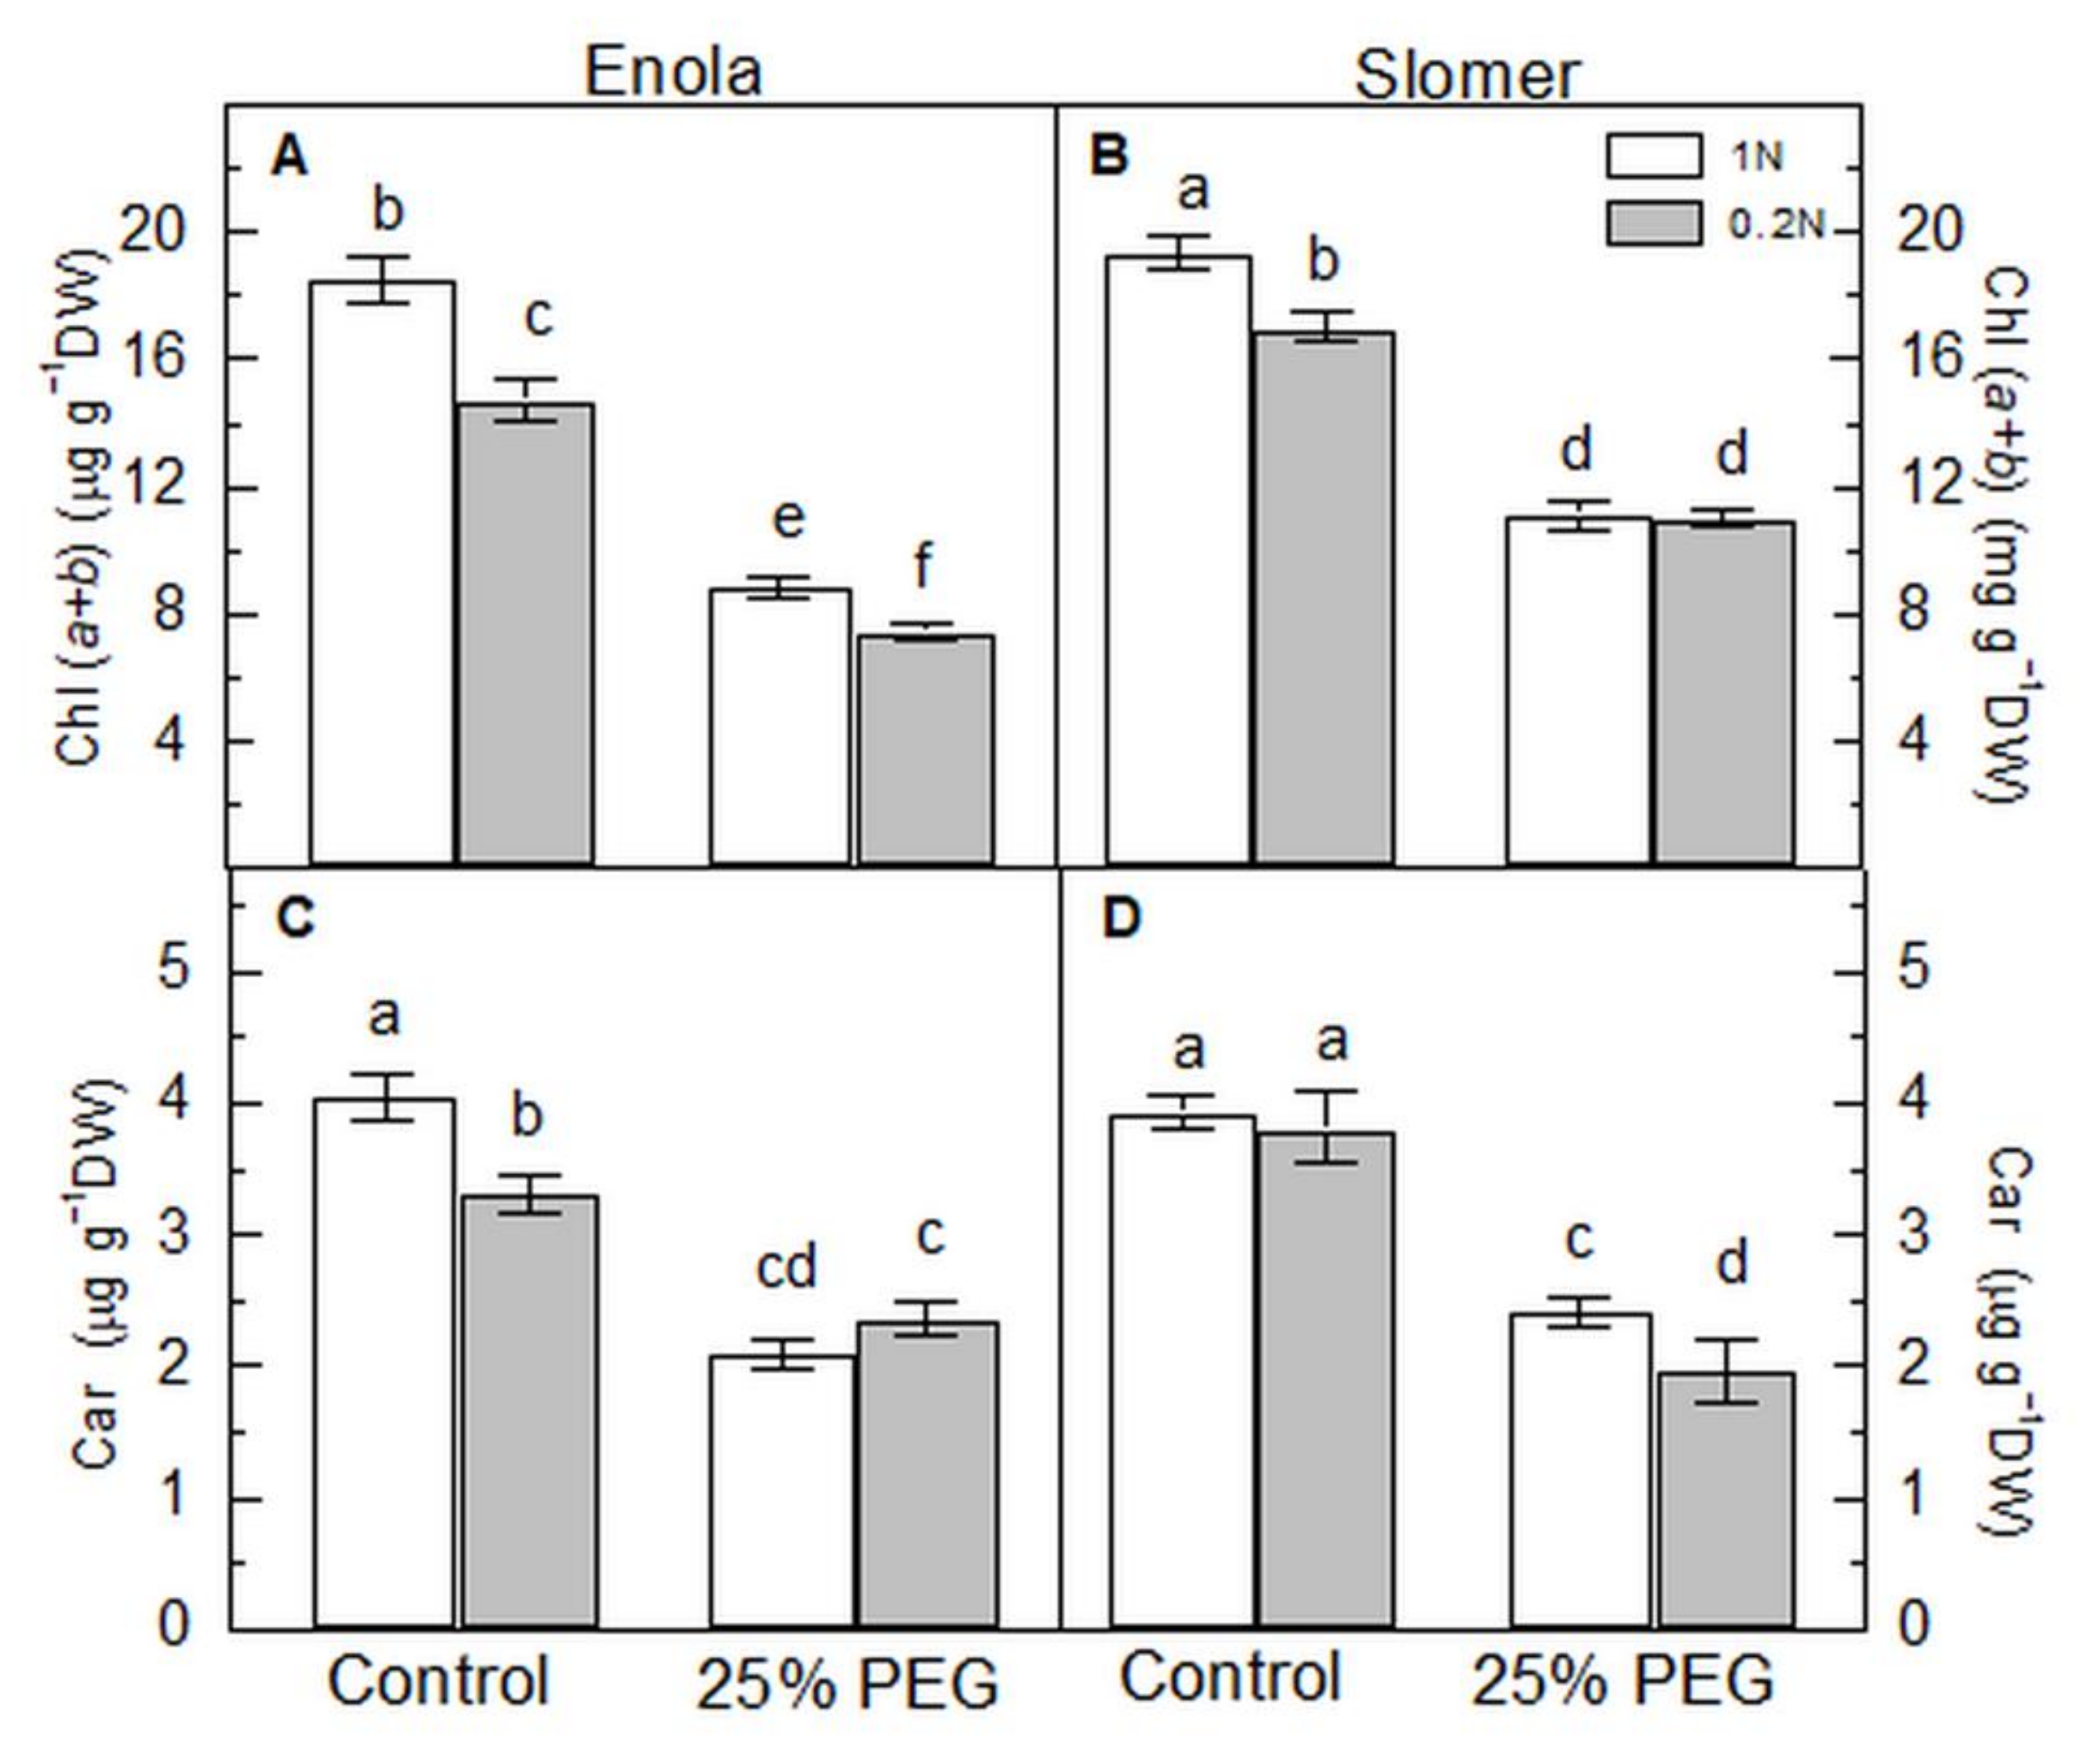 Plants Free Full Text Optimal Nitrogen Supply Ameliorates The Performance Of Wheat Seedlings Under Osmotic Stress In Genotype Specific Manner Html